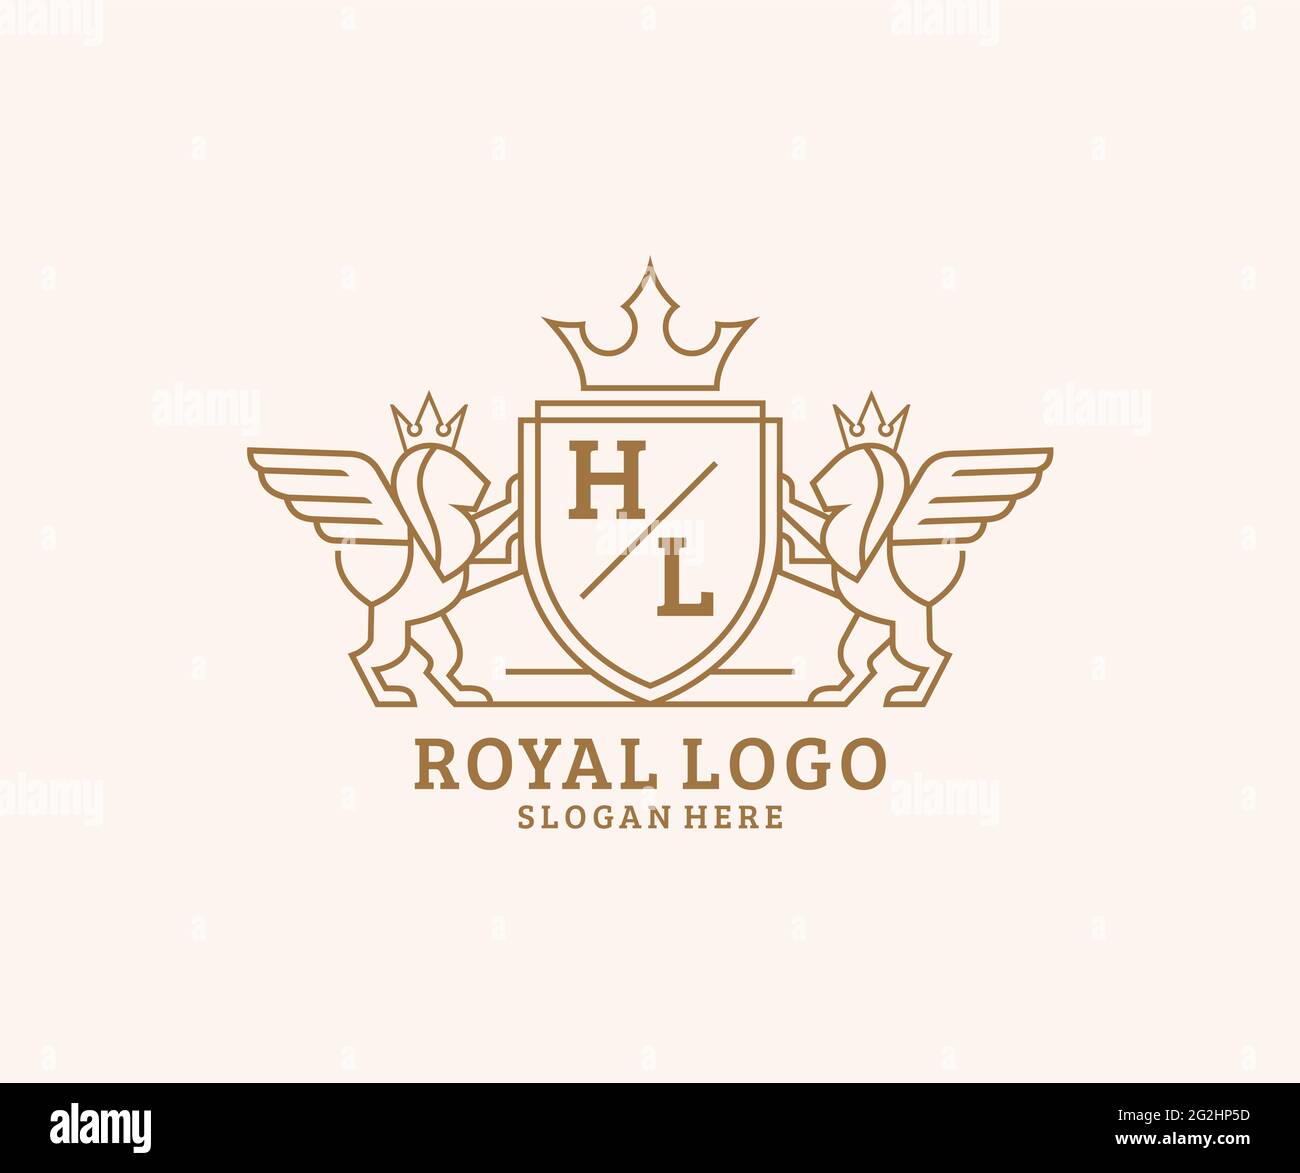 HL Letter Lion Royal Luxury Heraldic,Crest Logo template in vector art for Restaurant, Royalty, Boutique, Cafe, Hotel, Heraldic, Jewelry, Fashion and Stock Vector